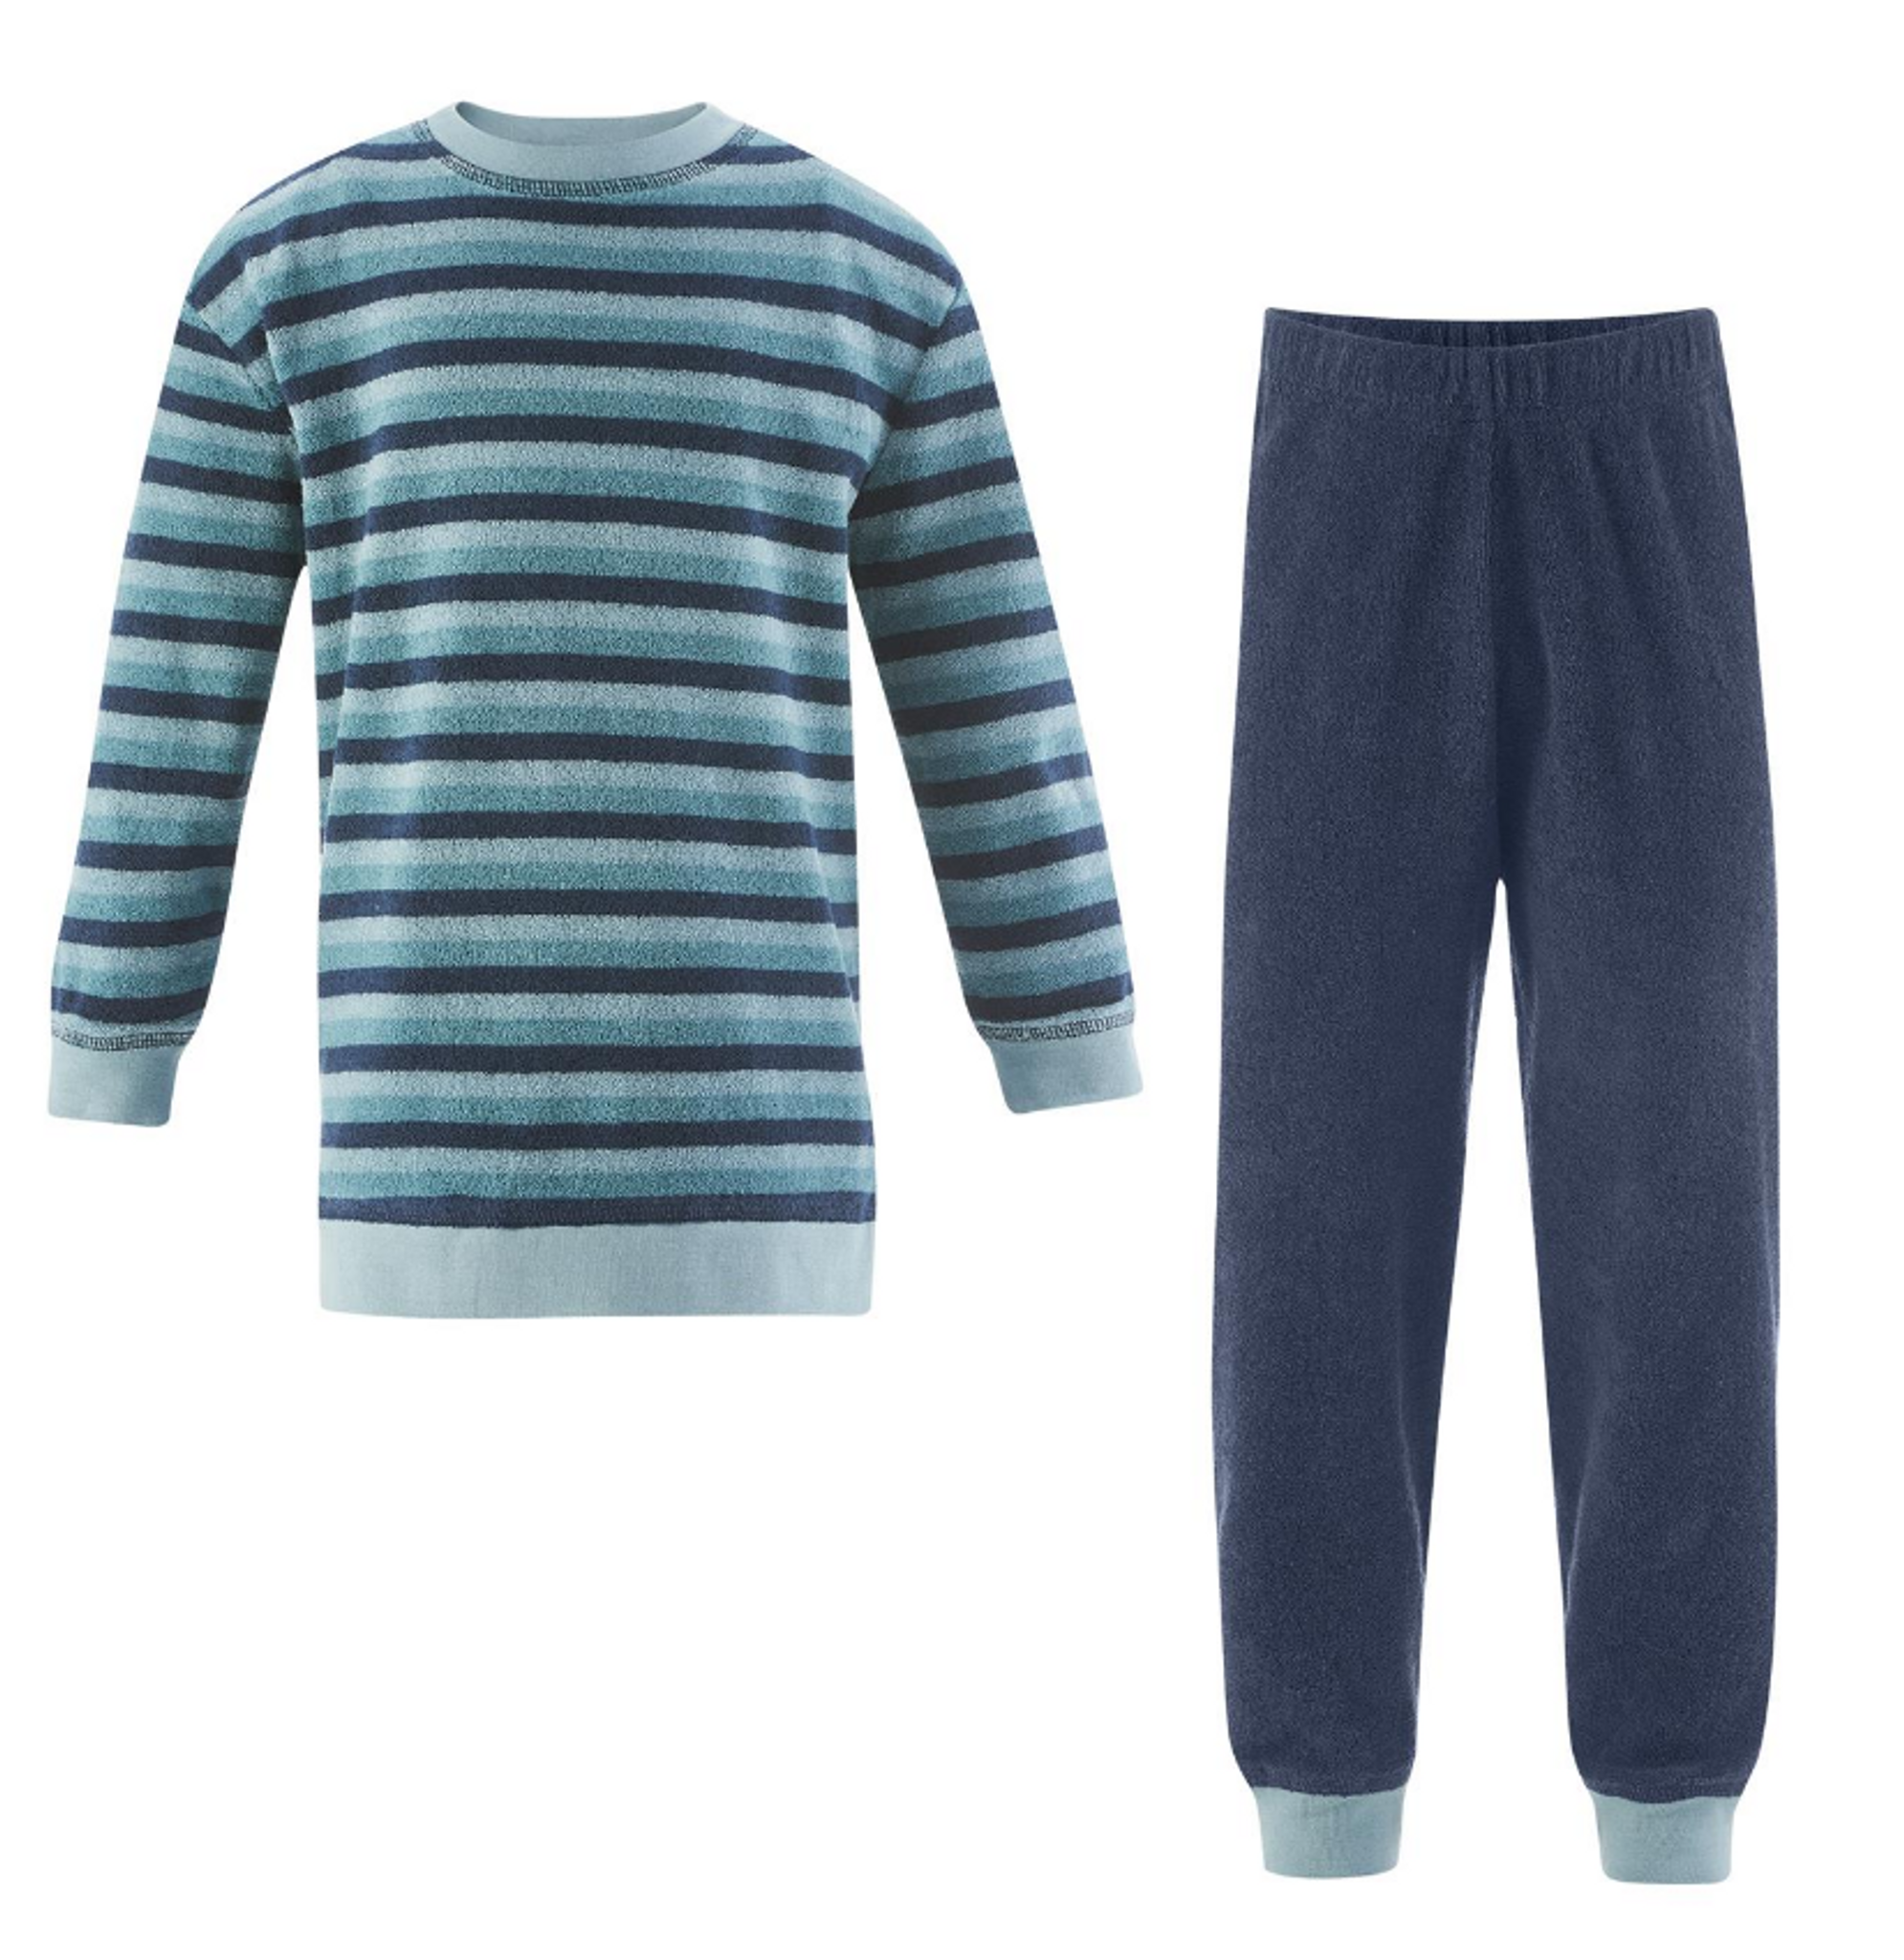 Organic Cotton Terry Shirt and Pants Set for Children - Little